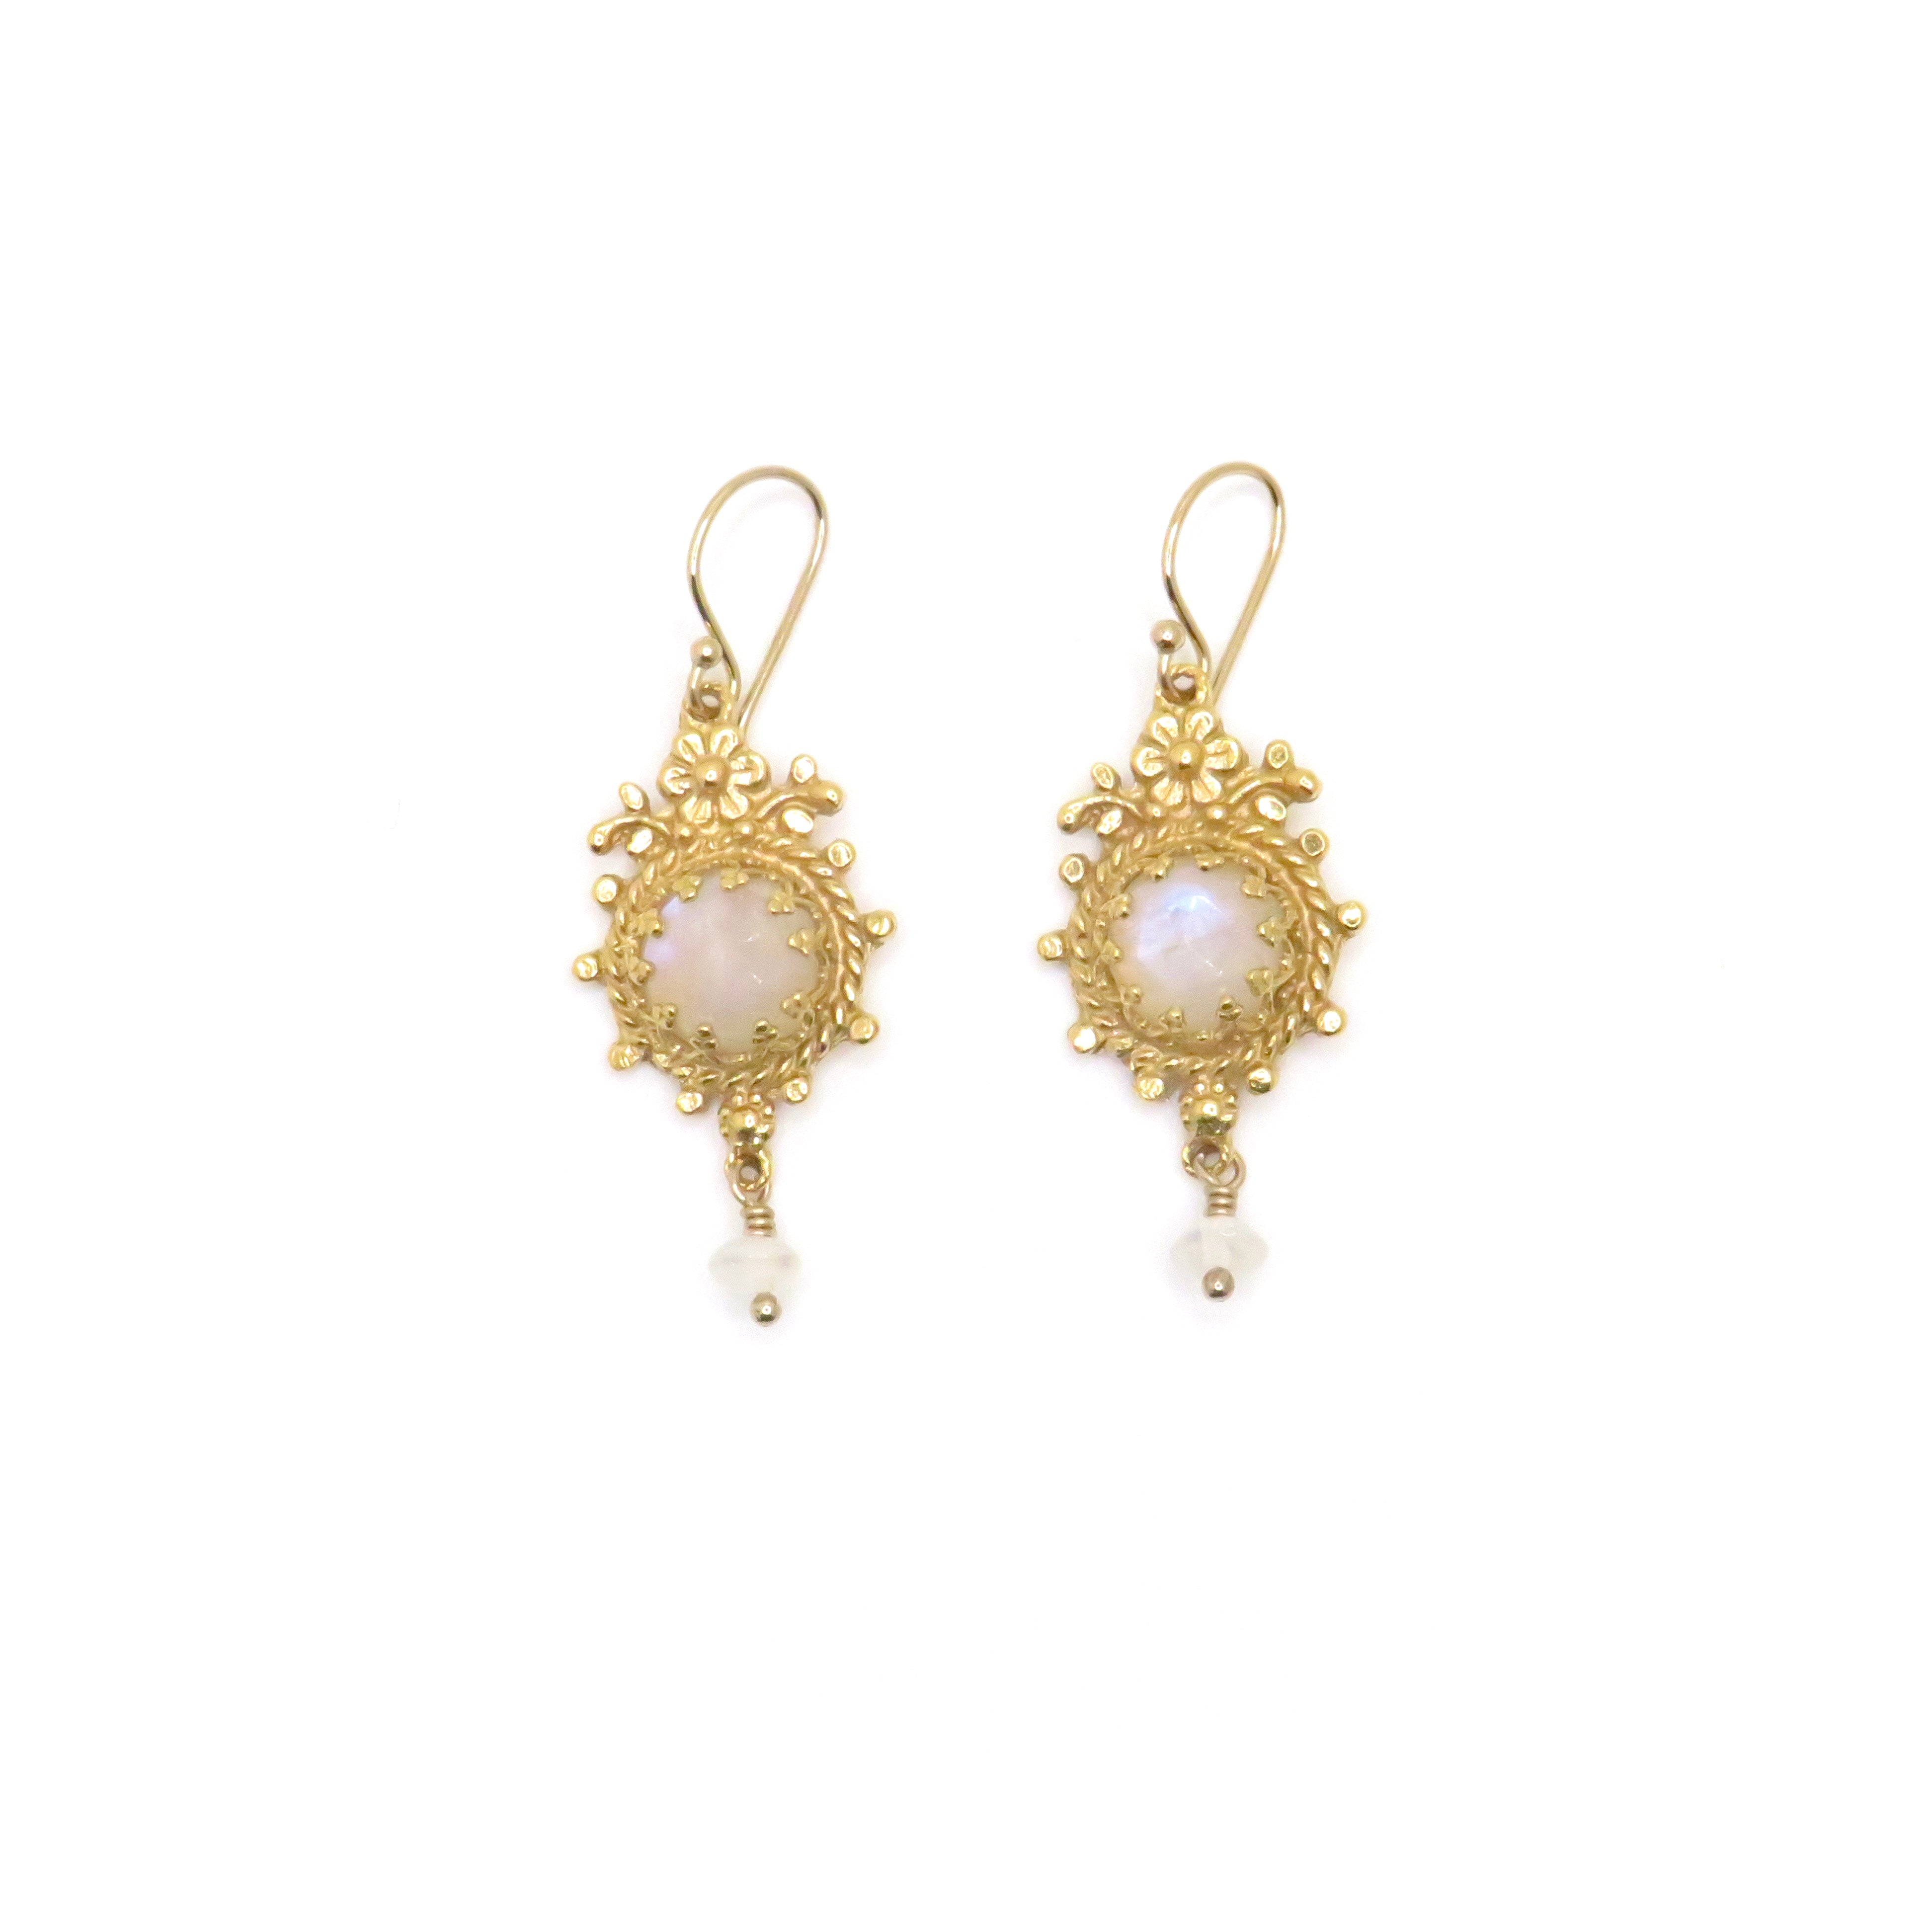 gold drop earrings with white gemstone and bead